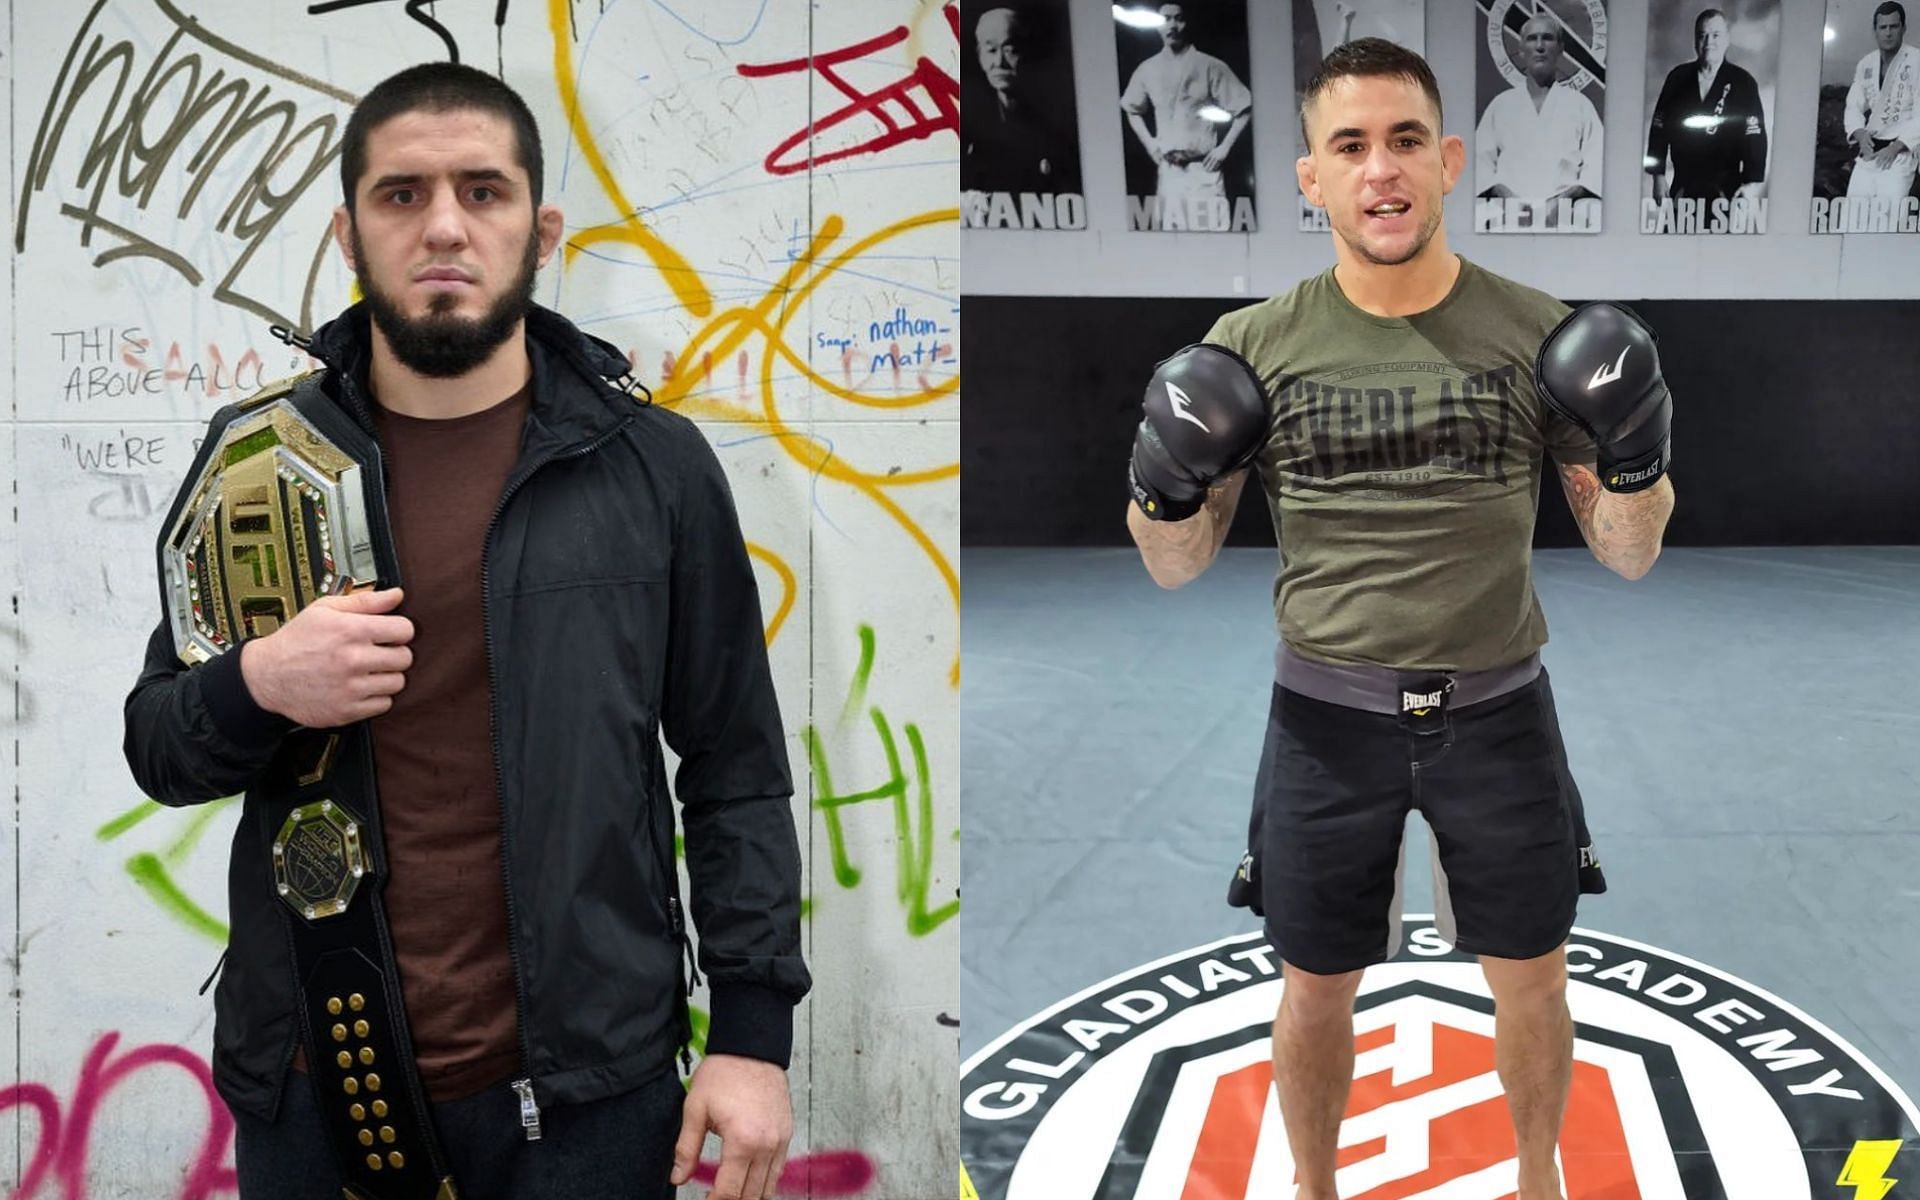 Islam Makhachev (left) will defend his lightweight title in the main event of UFC 302 against Dustin Poirier (right) [Photo Courtesy @islam_makhachev and @dustinpoirier on Instagram]